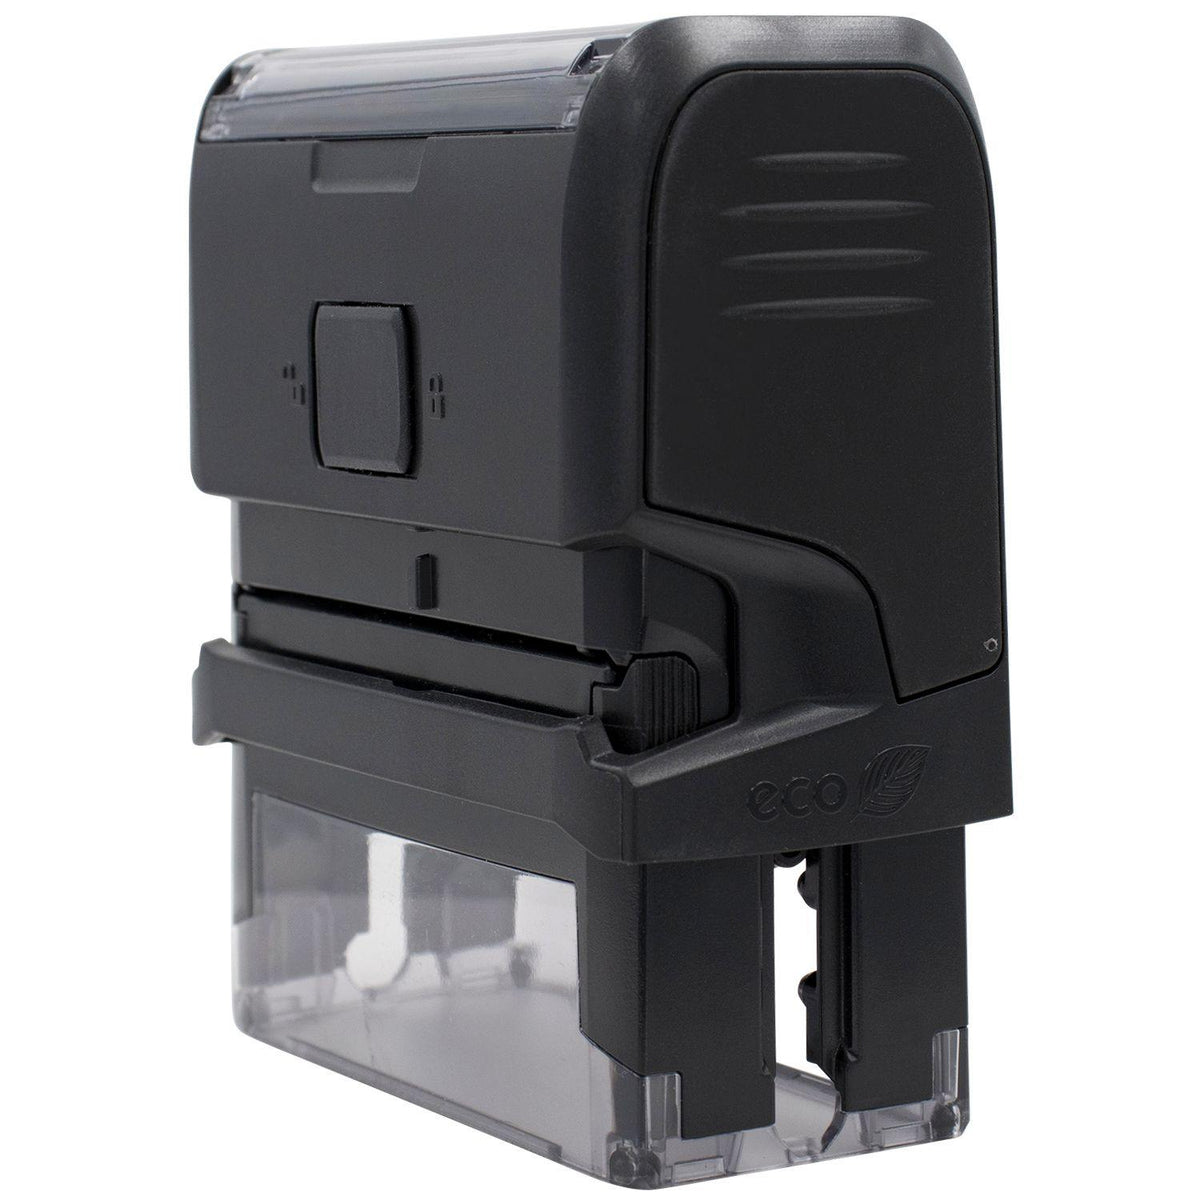 Self Inking Witness Stamp - Engineer Seal Stamps - Brand_Trodat, Impression Size_Small, Stamp Type_Self-Inking Stamp, Type of Use_Legal